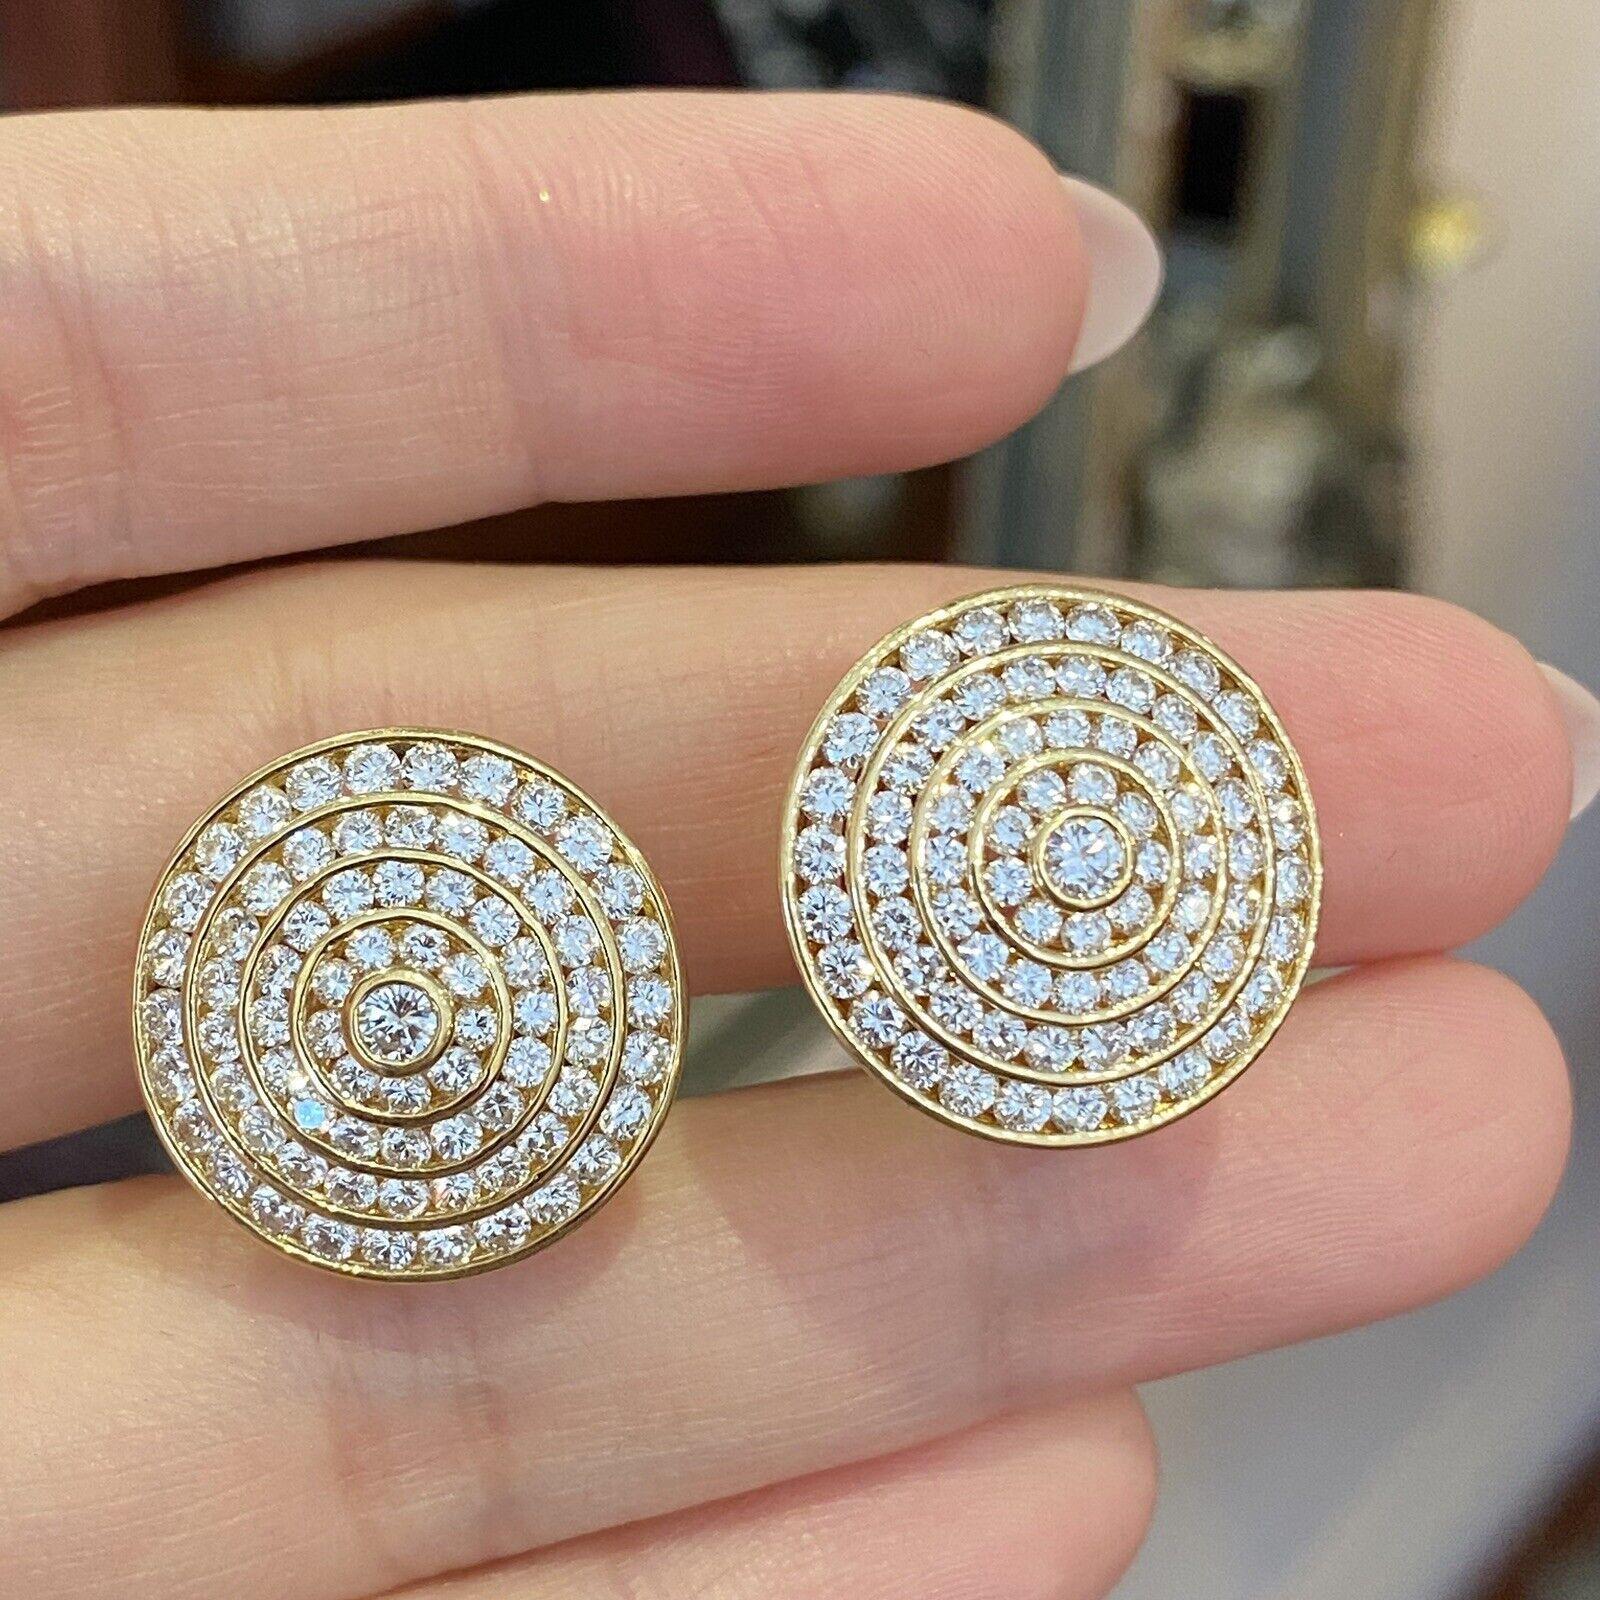 4 Row Circle Diamond Earrings 3.95 carat total weight in 18k Yellow Gold For Sale 1